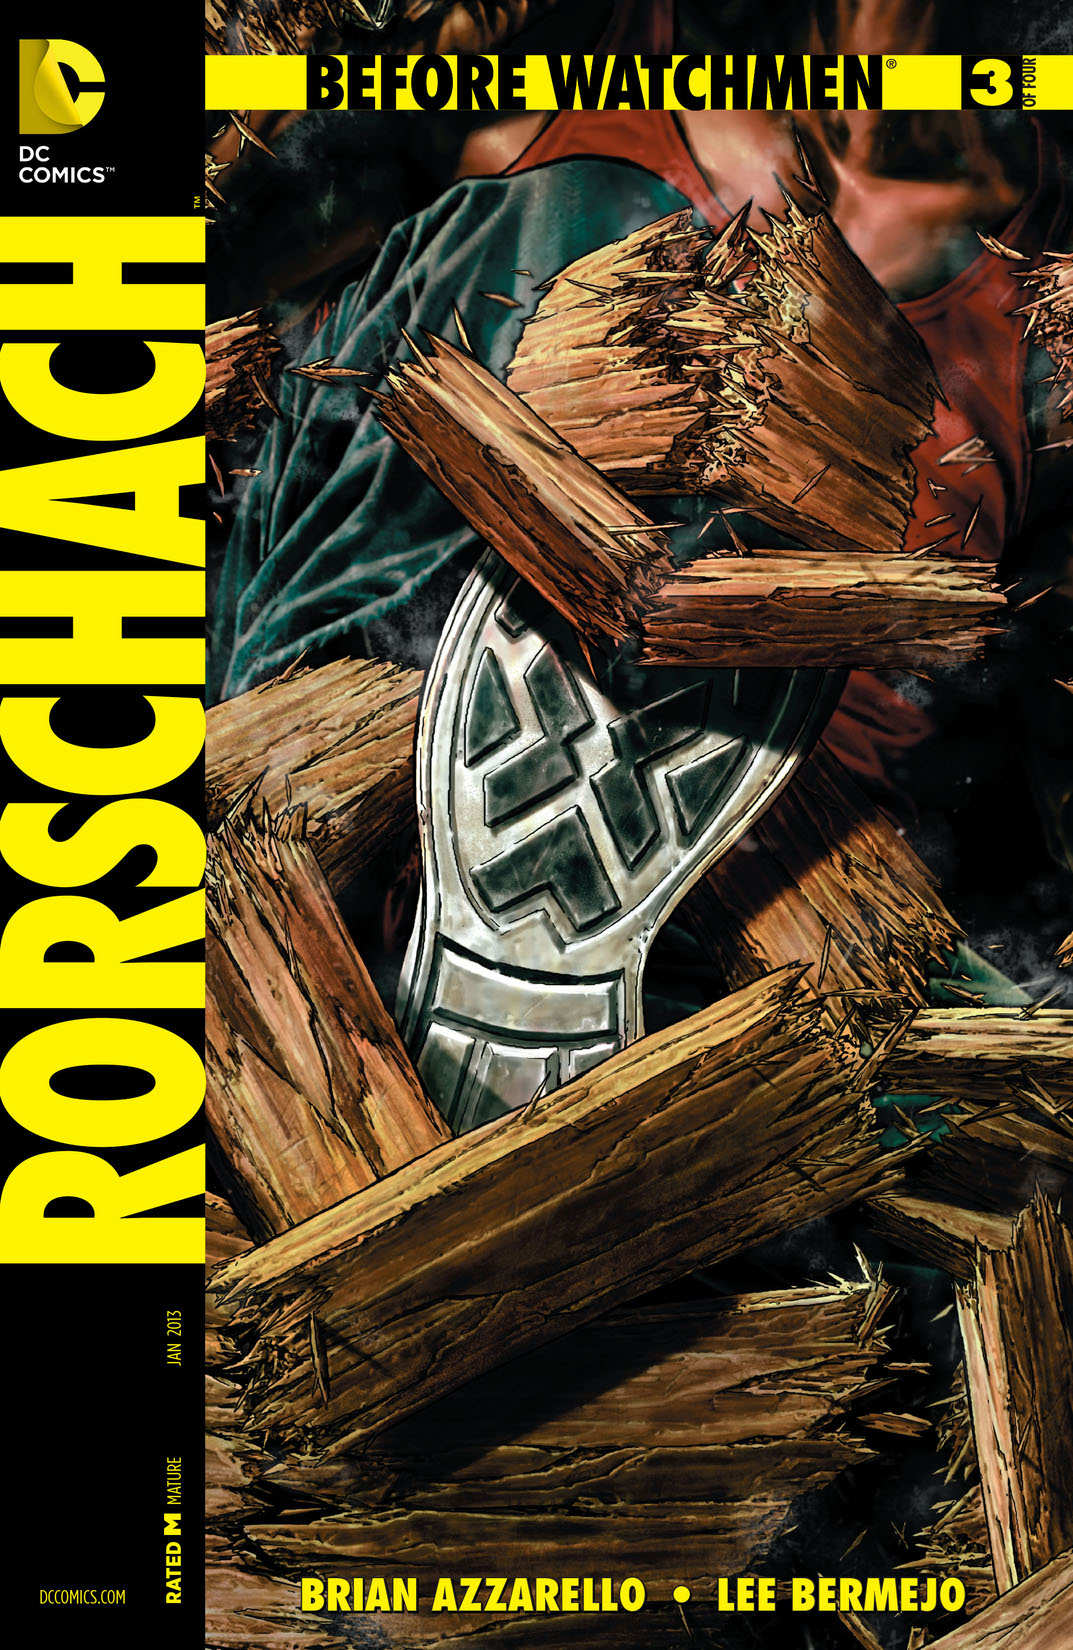 Before Watchmen: Rorschach #3 preview images